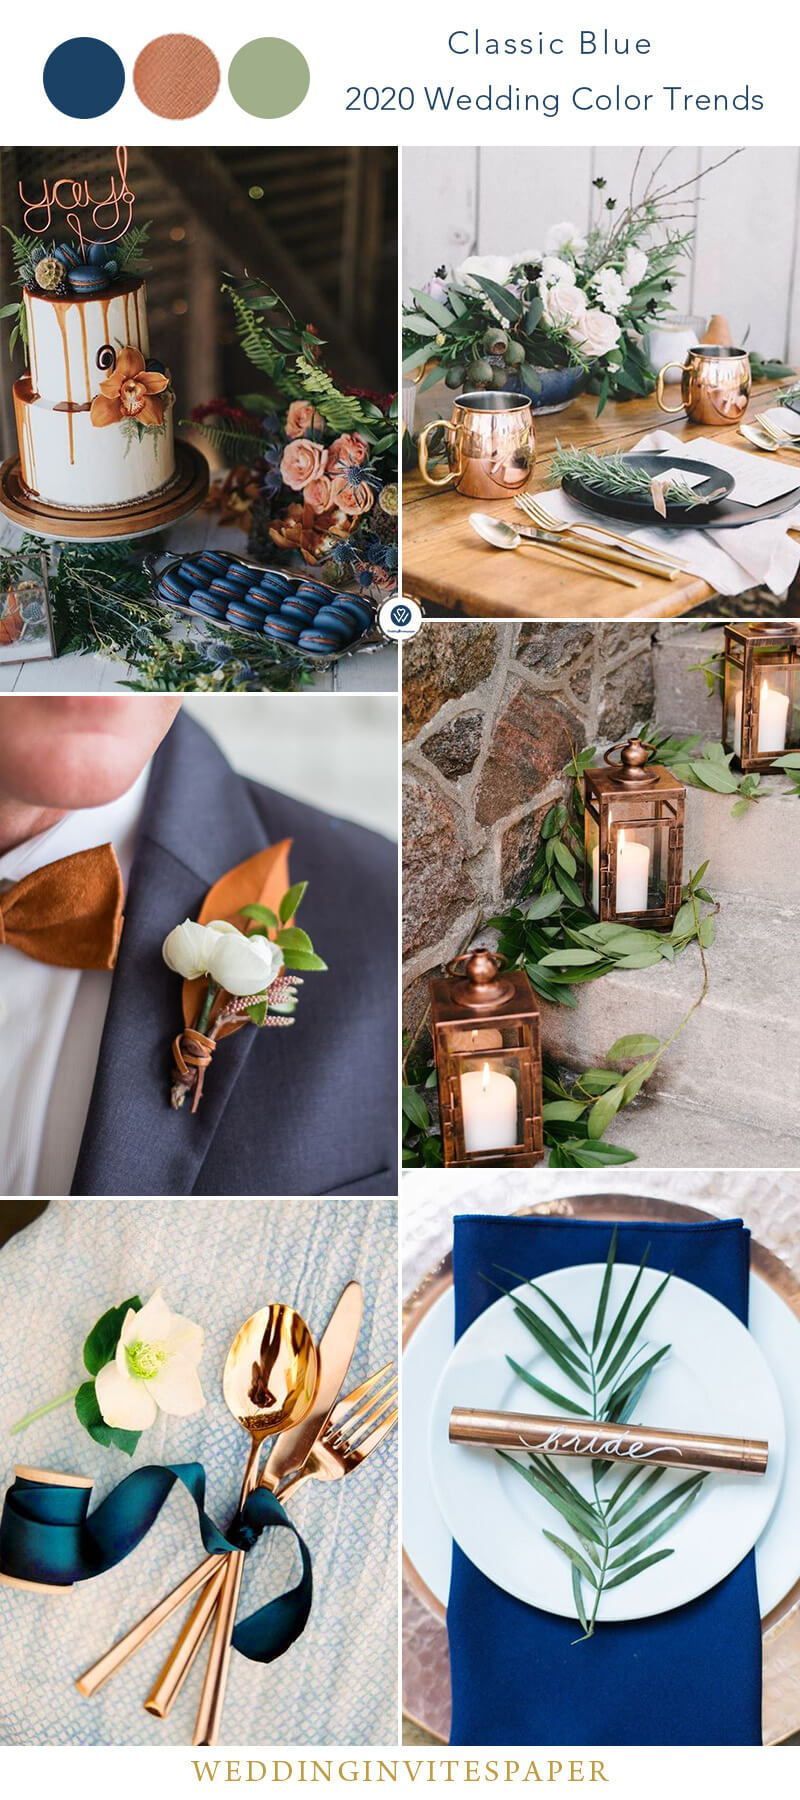 10 Stunning Ways to Include Pantone's Color of the Year  in 2020 Wedding -   14 wedding Blue navy ideas